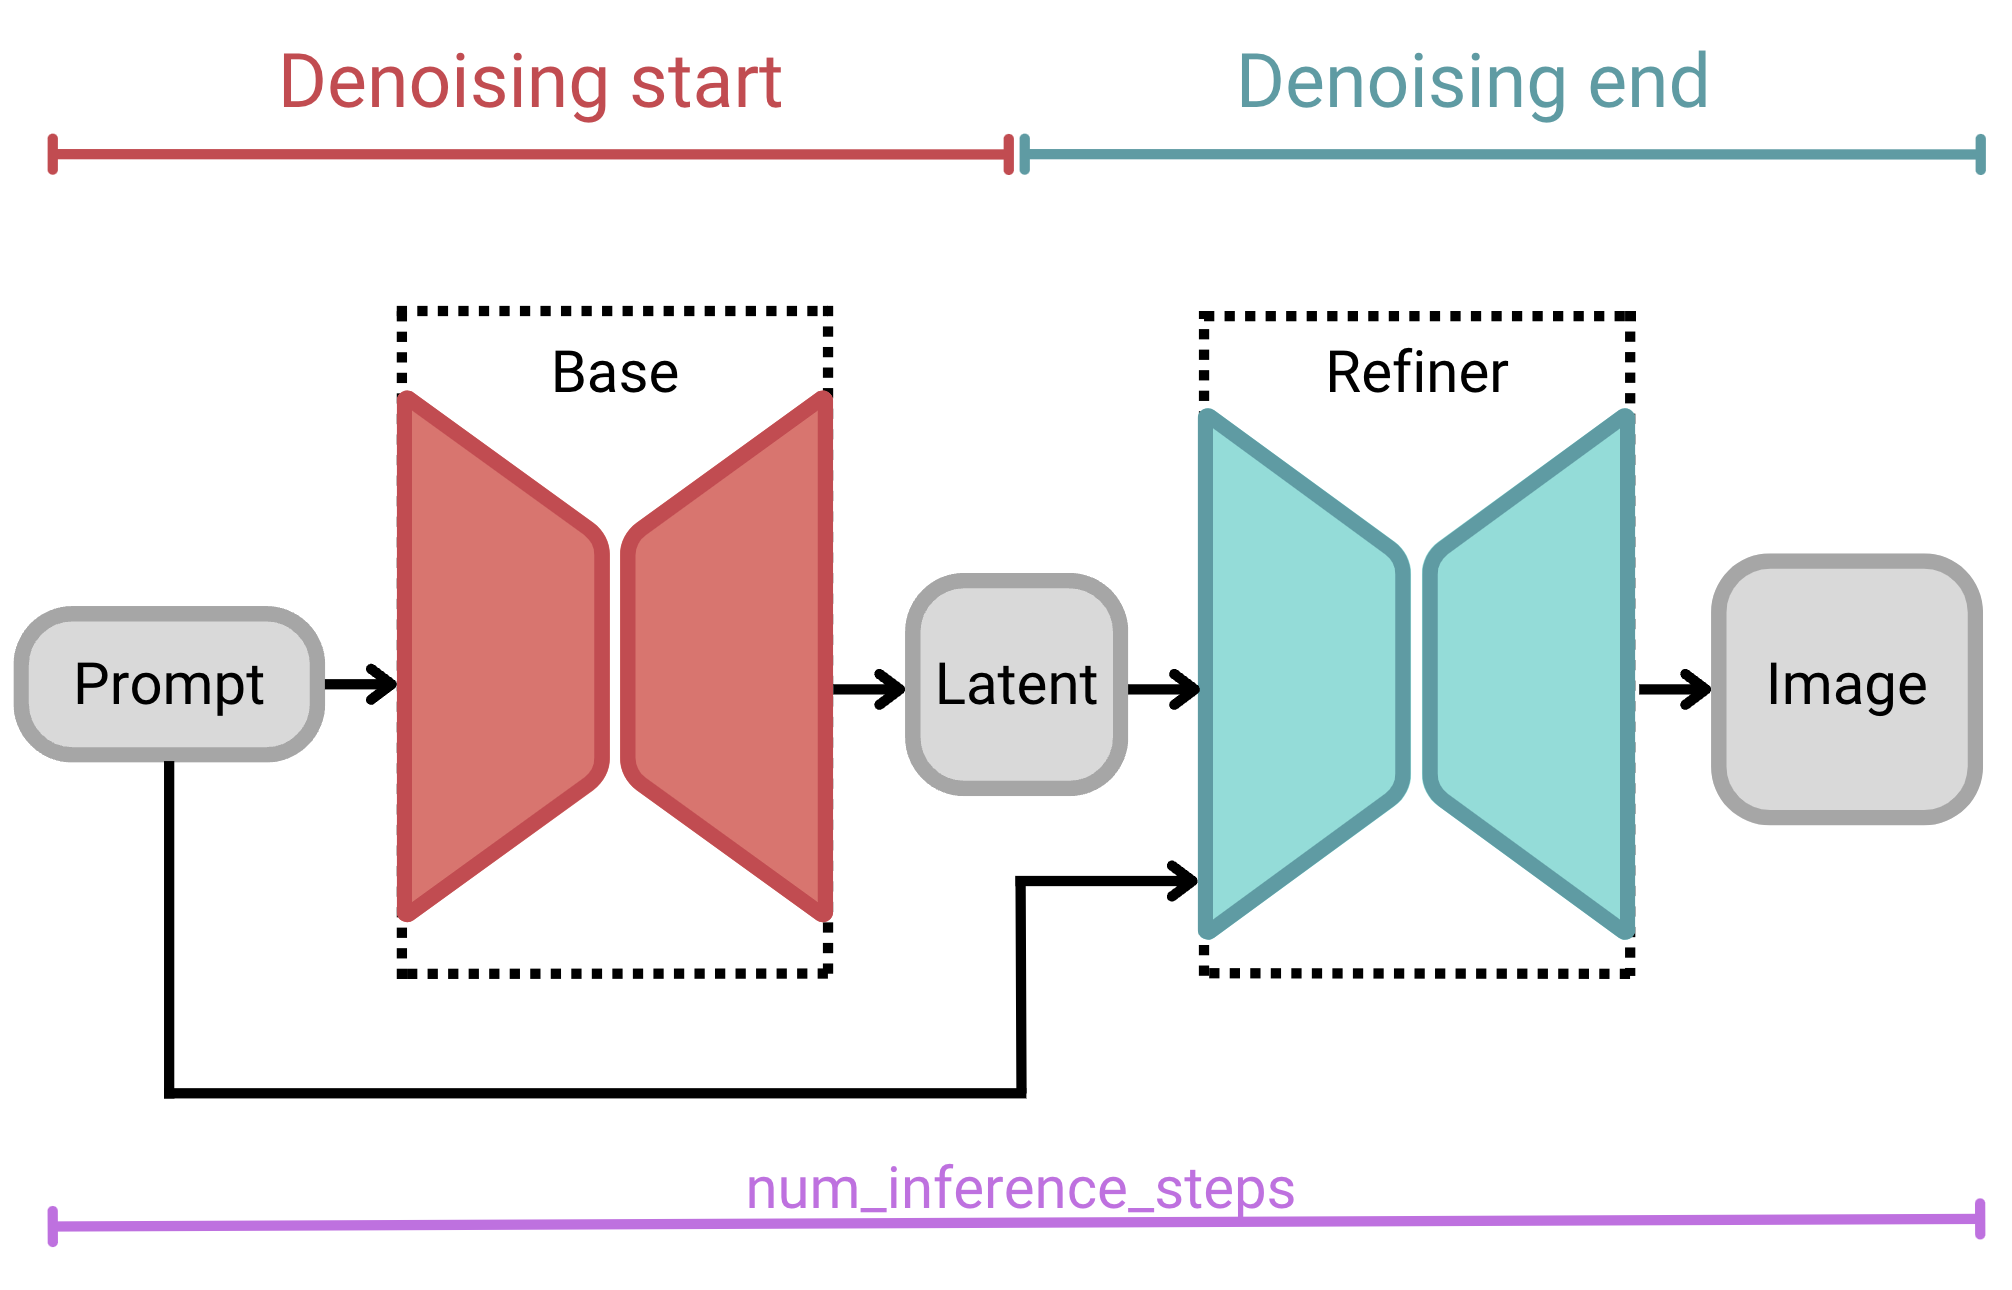 Graphic showing the SDXL 1.0 mixture-of-experts 2-stage architecture, demonstrating how the process is broken down into denoising start and denoising end.